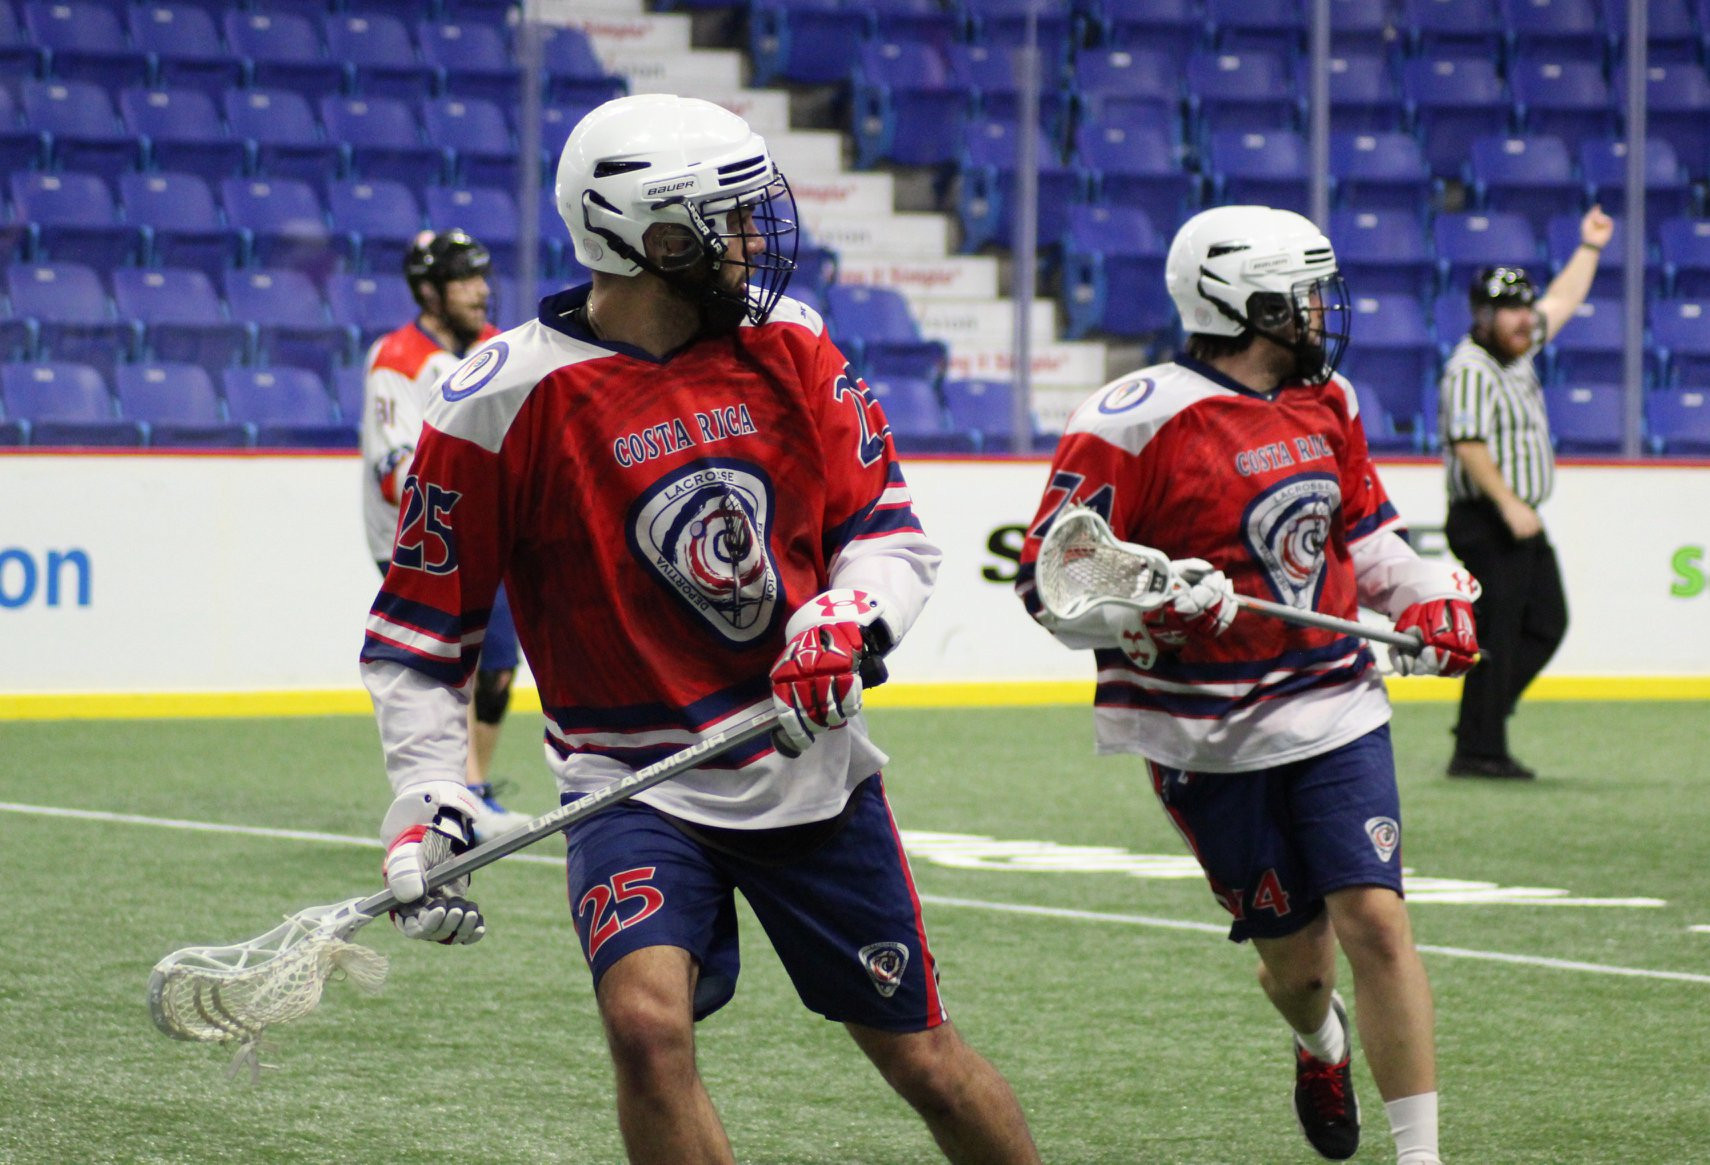 Costa Rica finished last at the World Lacrosse Men's Indoor World Championship ©Costa Rica Lacrosse